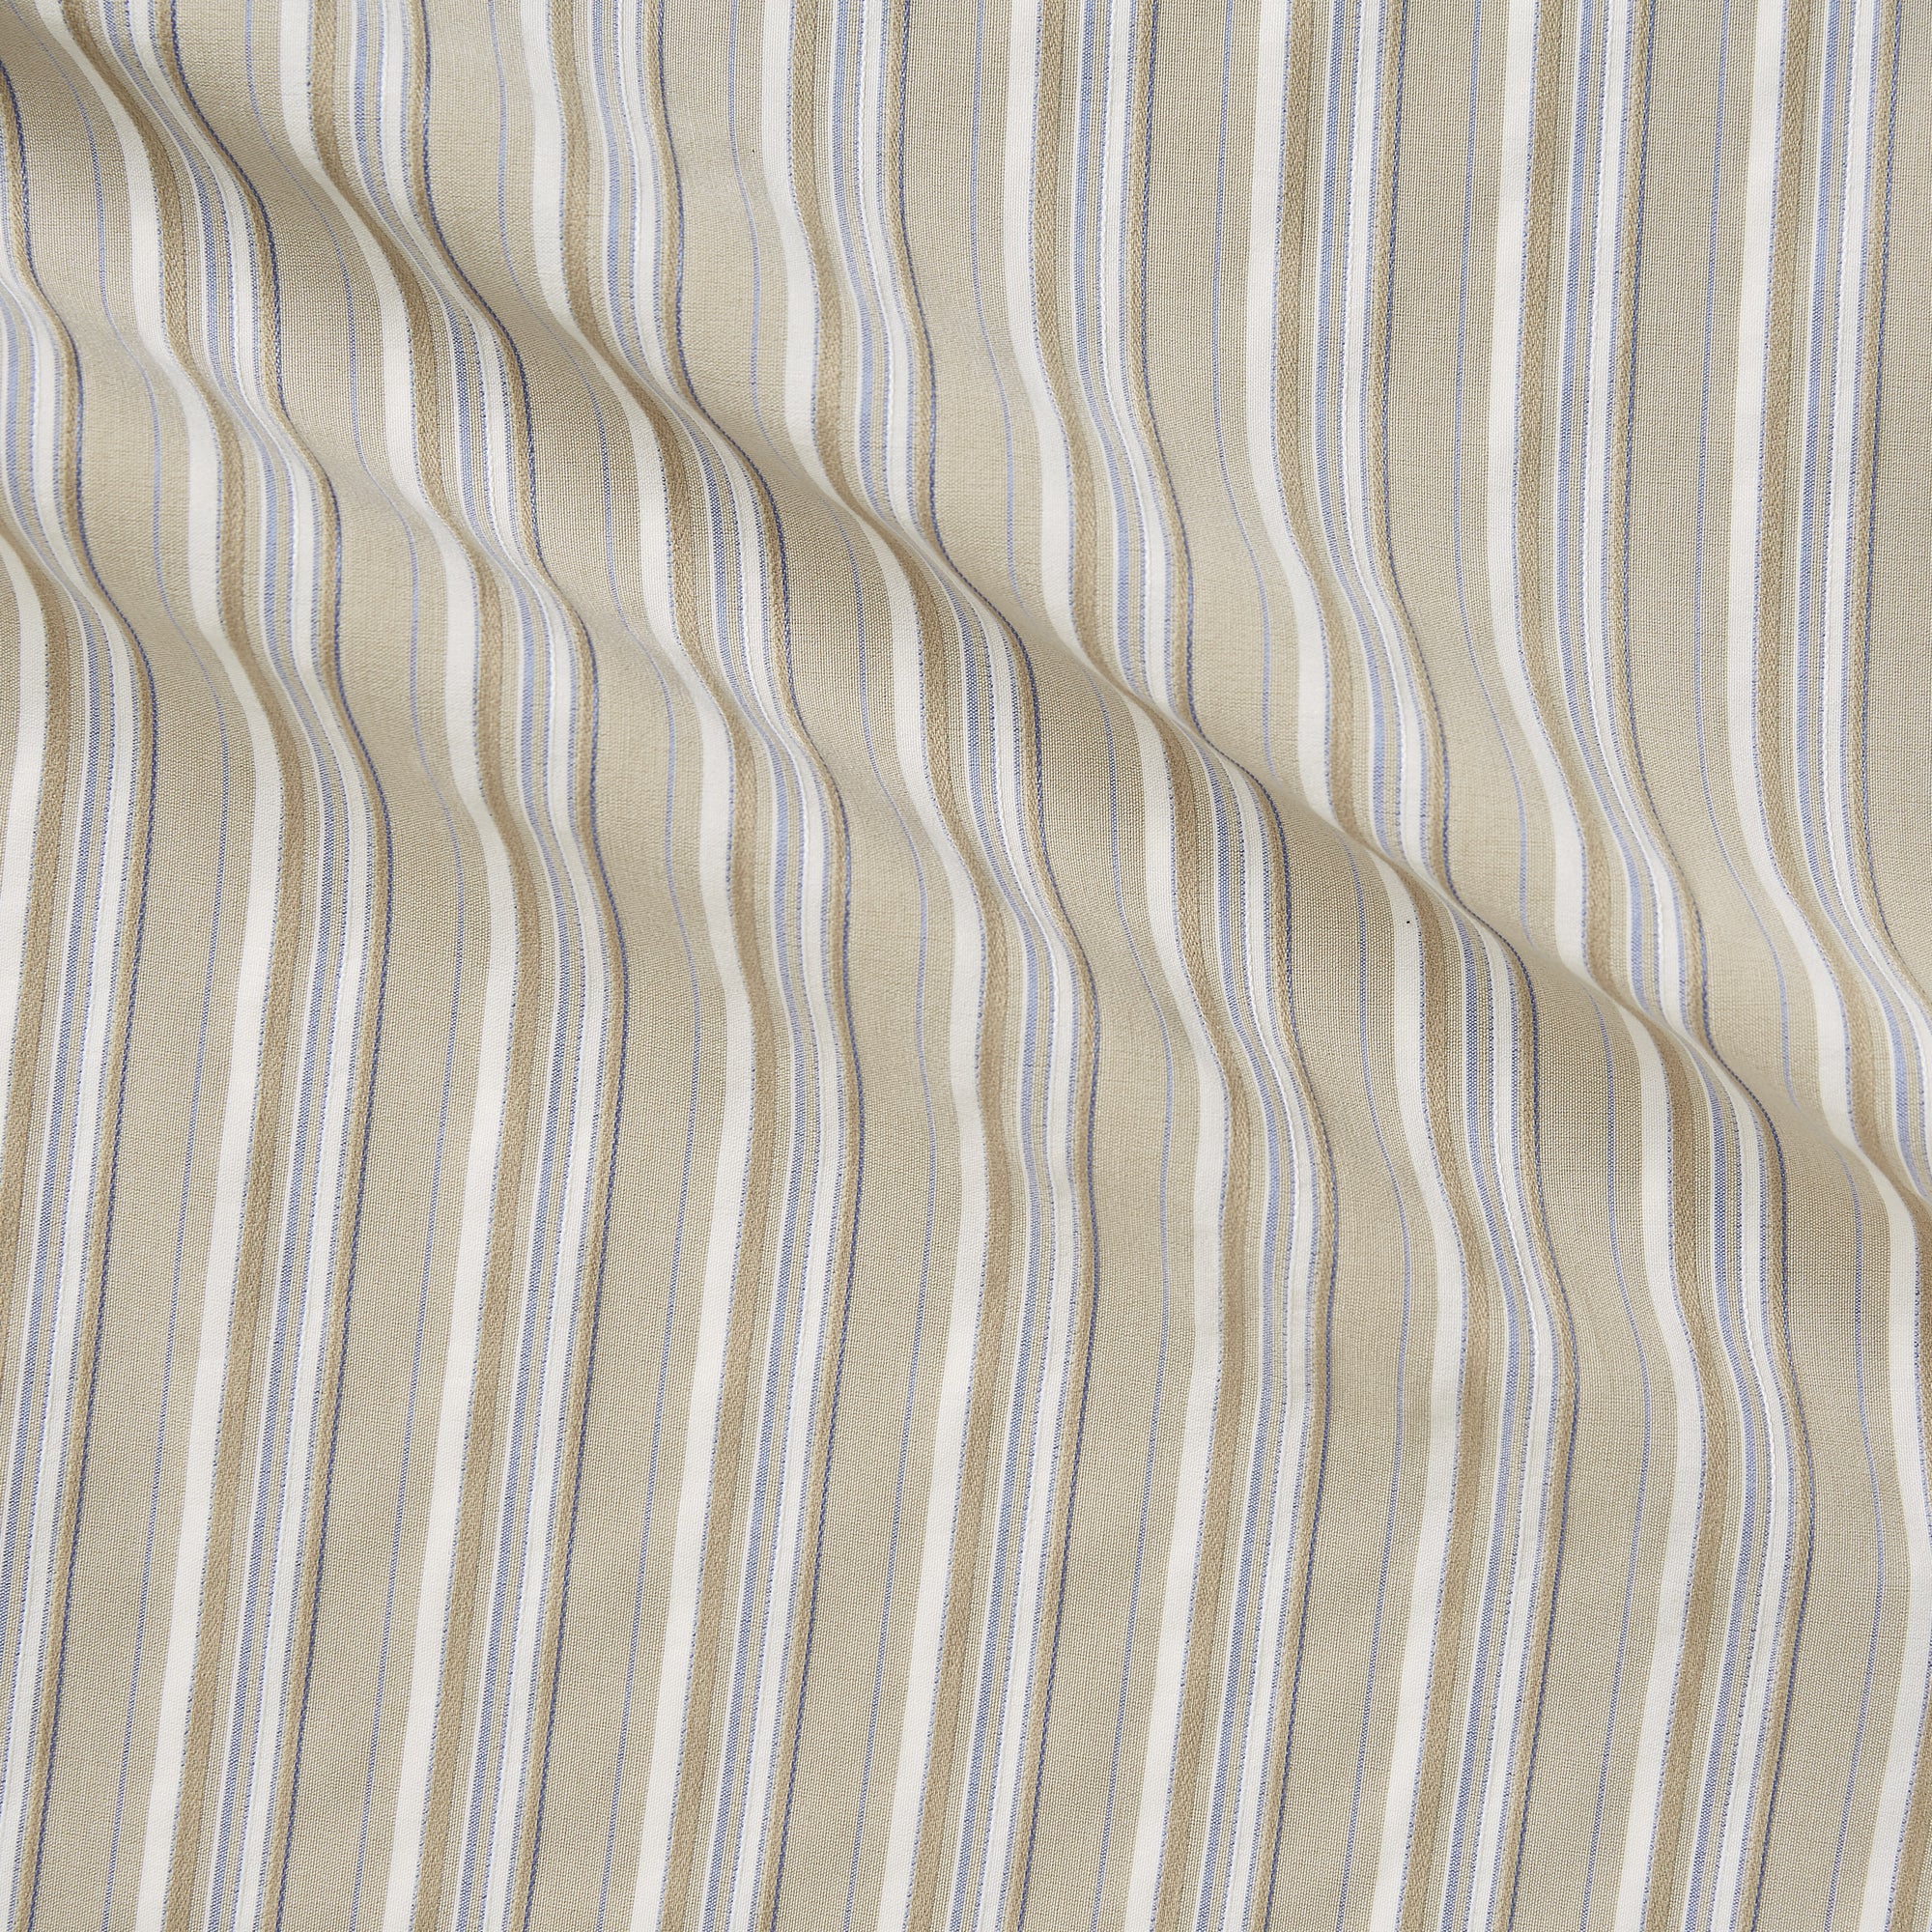 amalfi displaying the stone colored version with shadow stripes on stretch crisp rayon and polyester with spandex featuring moderate drape